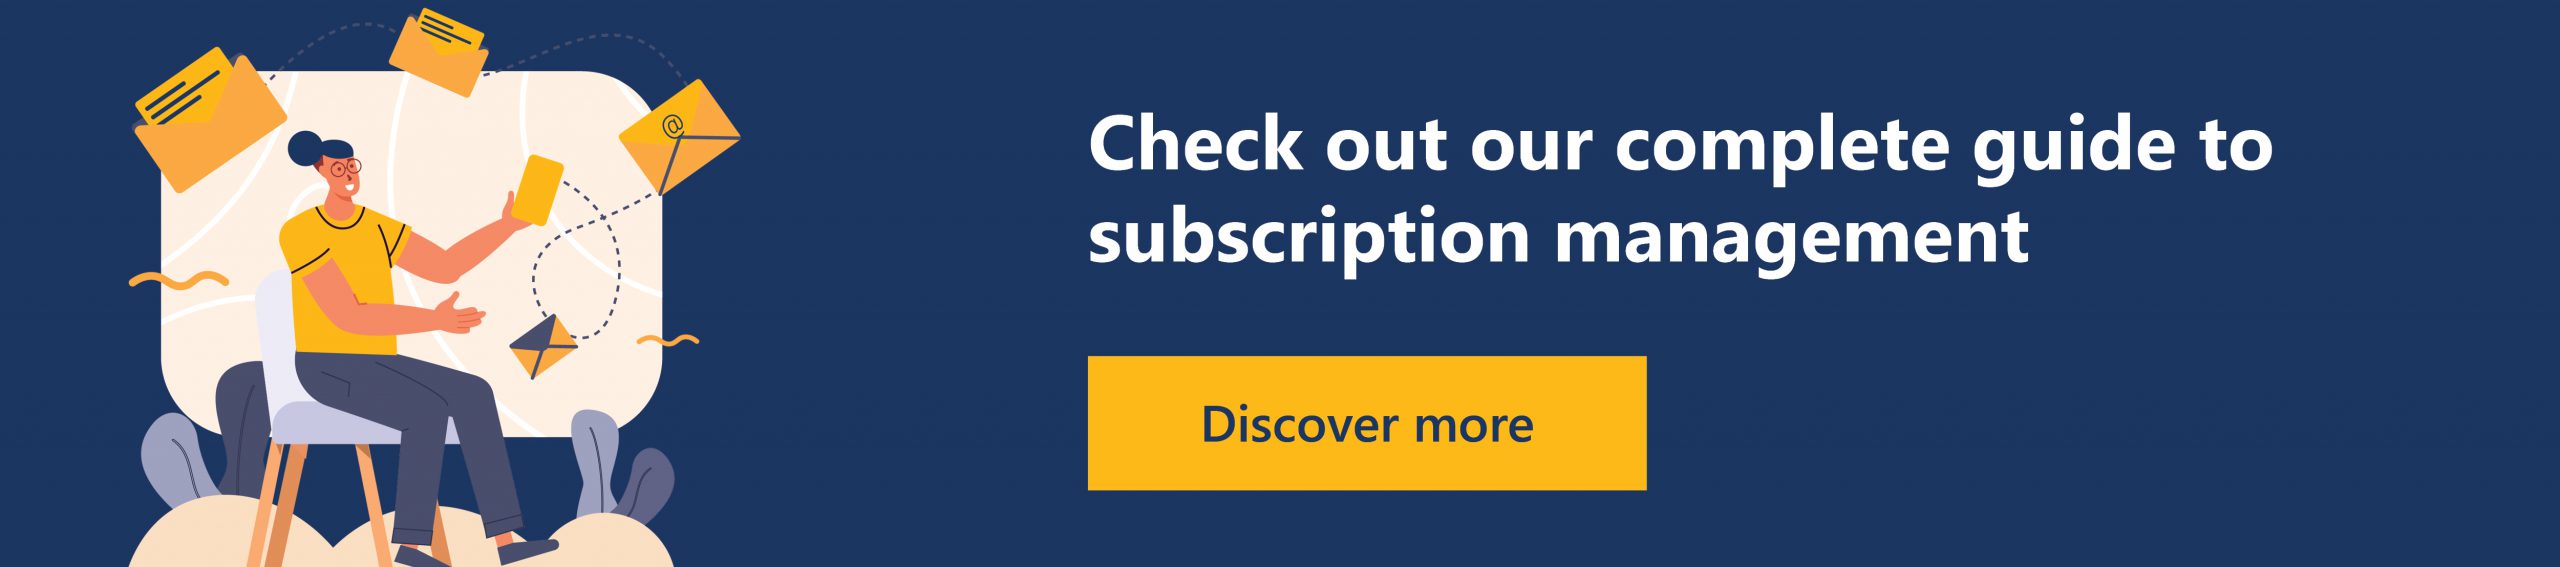 Complete guide to subscription management 2